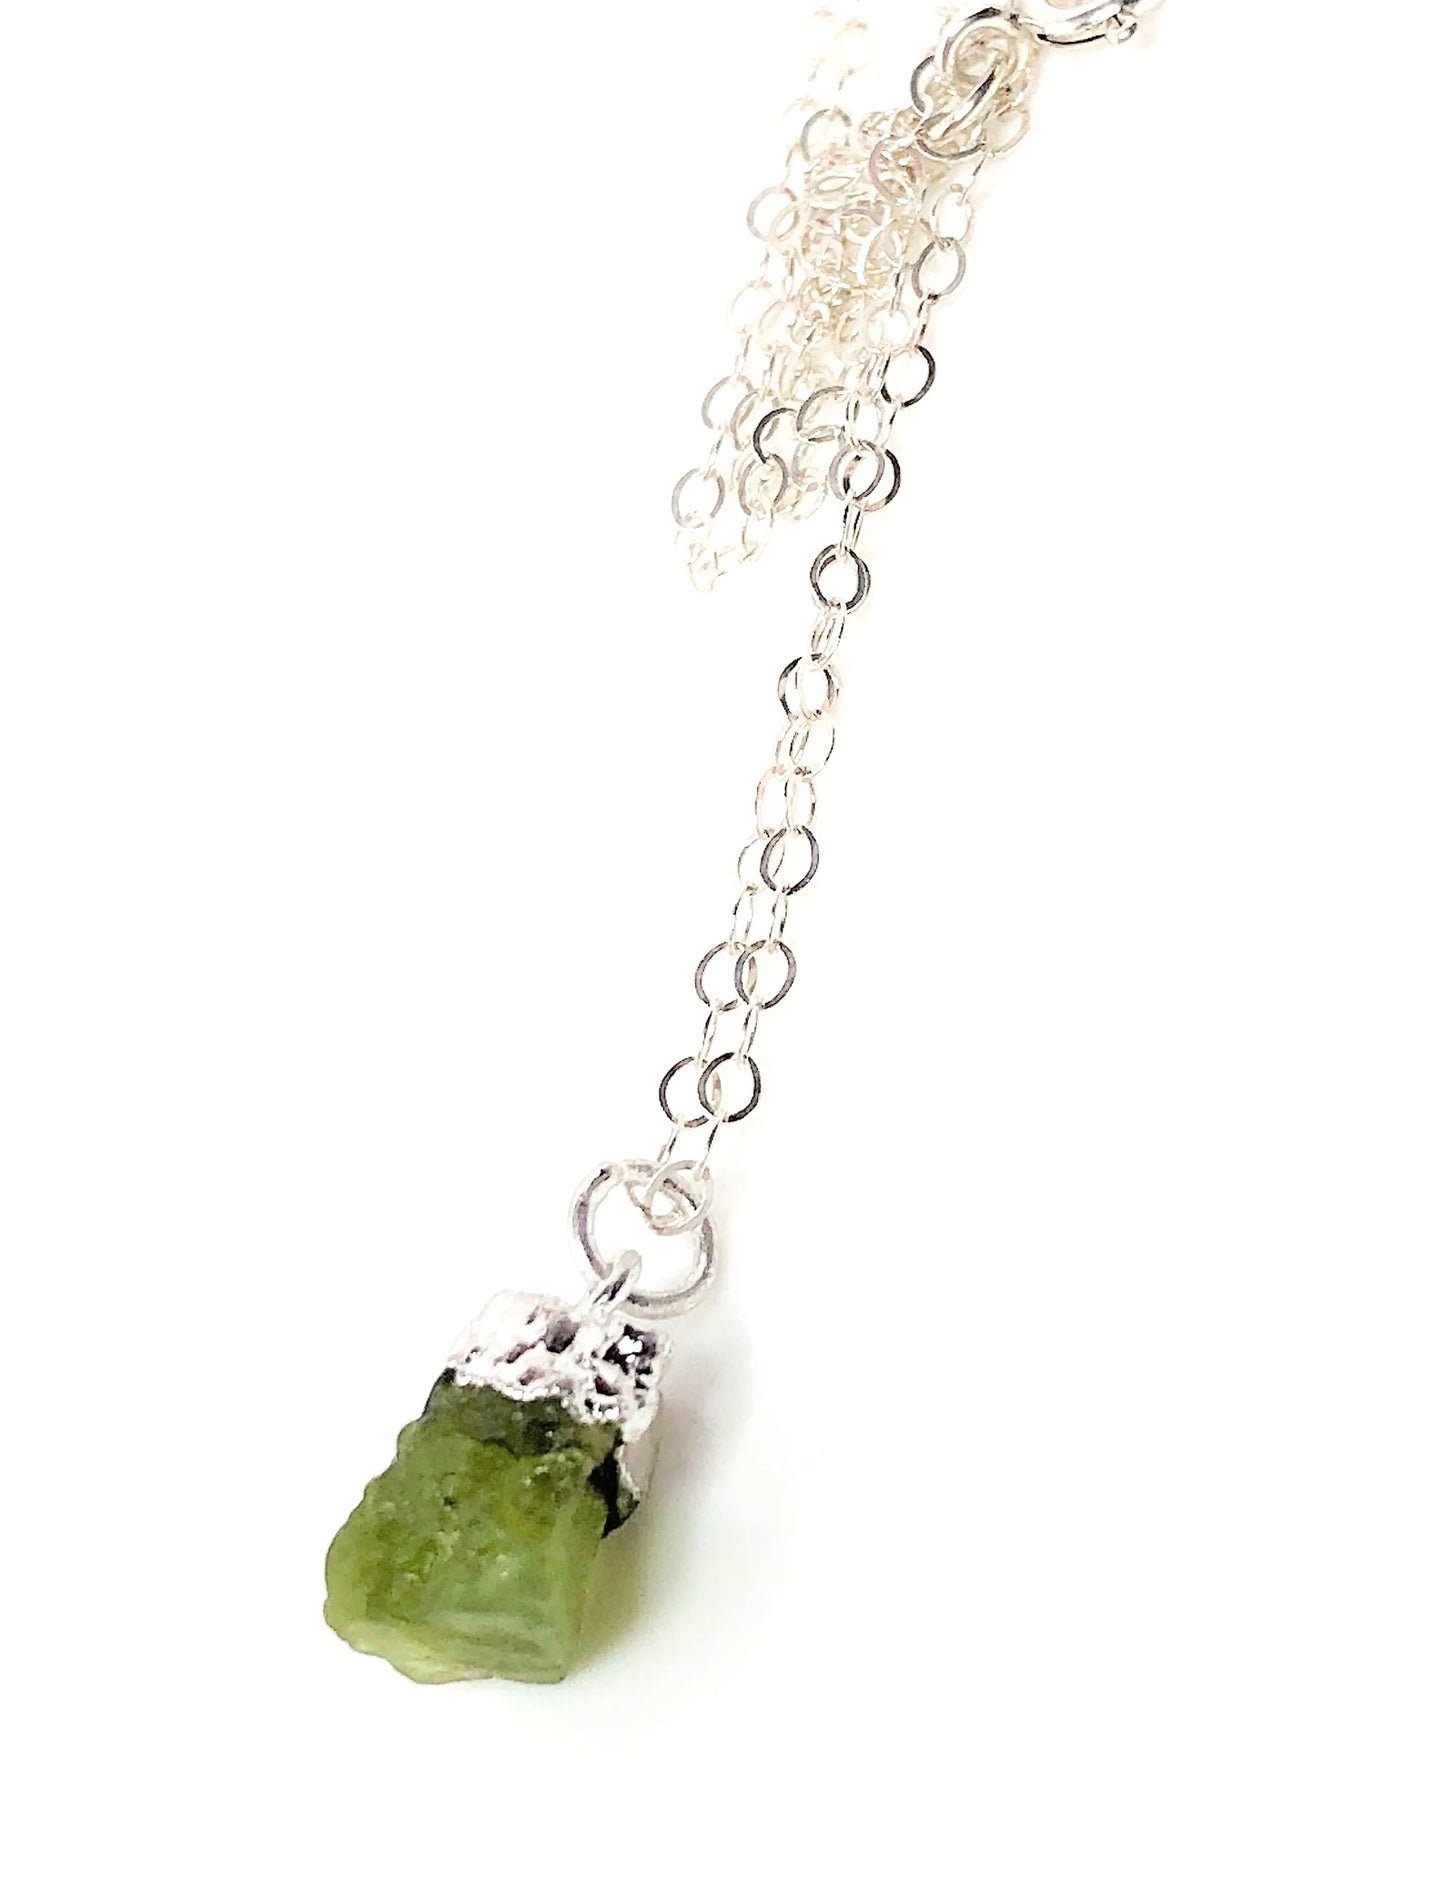 Green Peridot Pendant Raw Stone Necklace Sterling Silver Natural Stone Gift Minimalist Crystal Necklace Freeform Gemstone Dainty Stone Gift